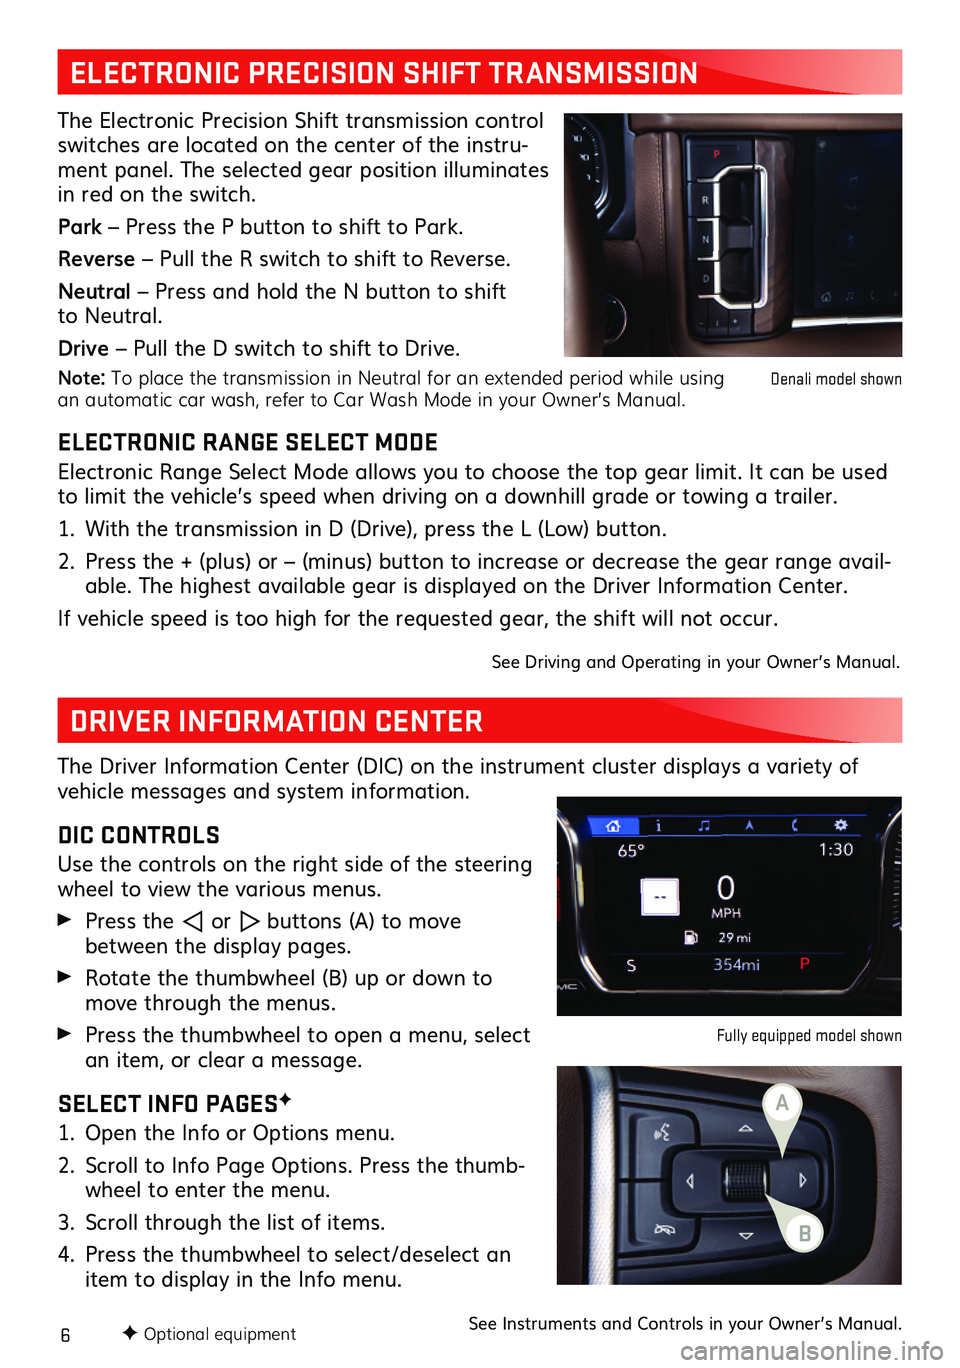 GMC YUKON 2021  Get To Know Guide 6
ELECTRONIC PRECISION SHIFT TRANSMISSION
The Electronic Precision Shift transmission control switches are located on the center of the instru-ment panel. The selected gear position illuminates in red